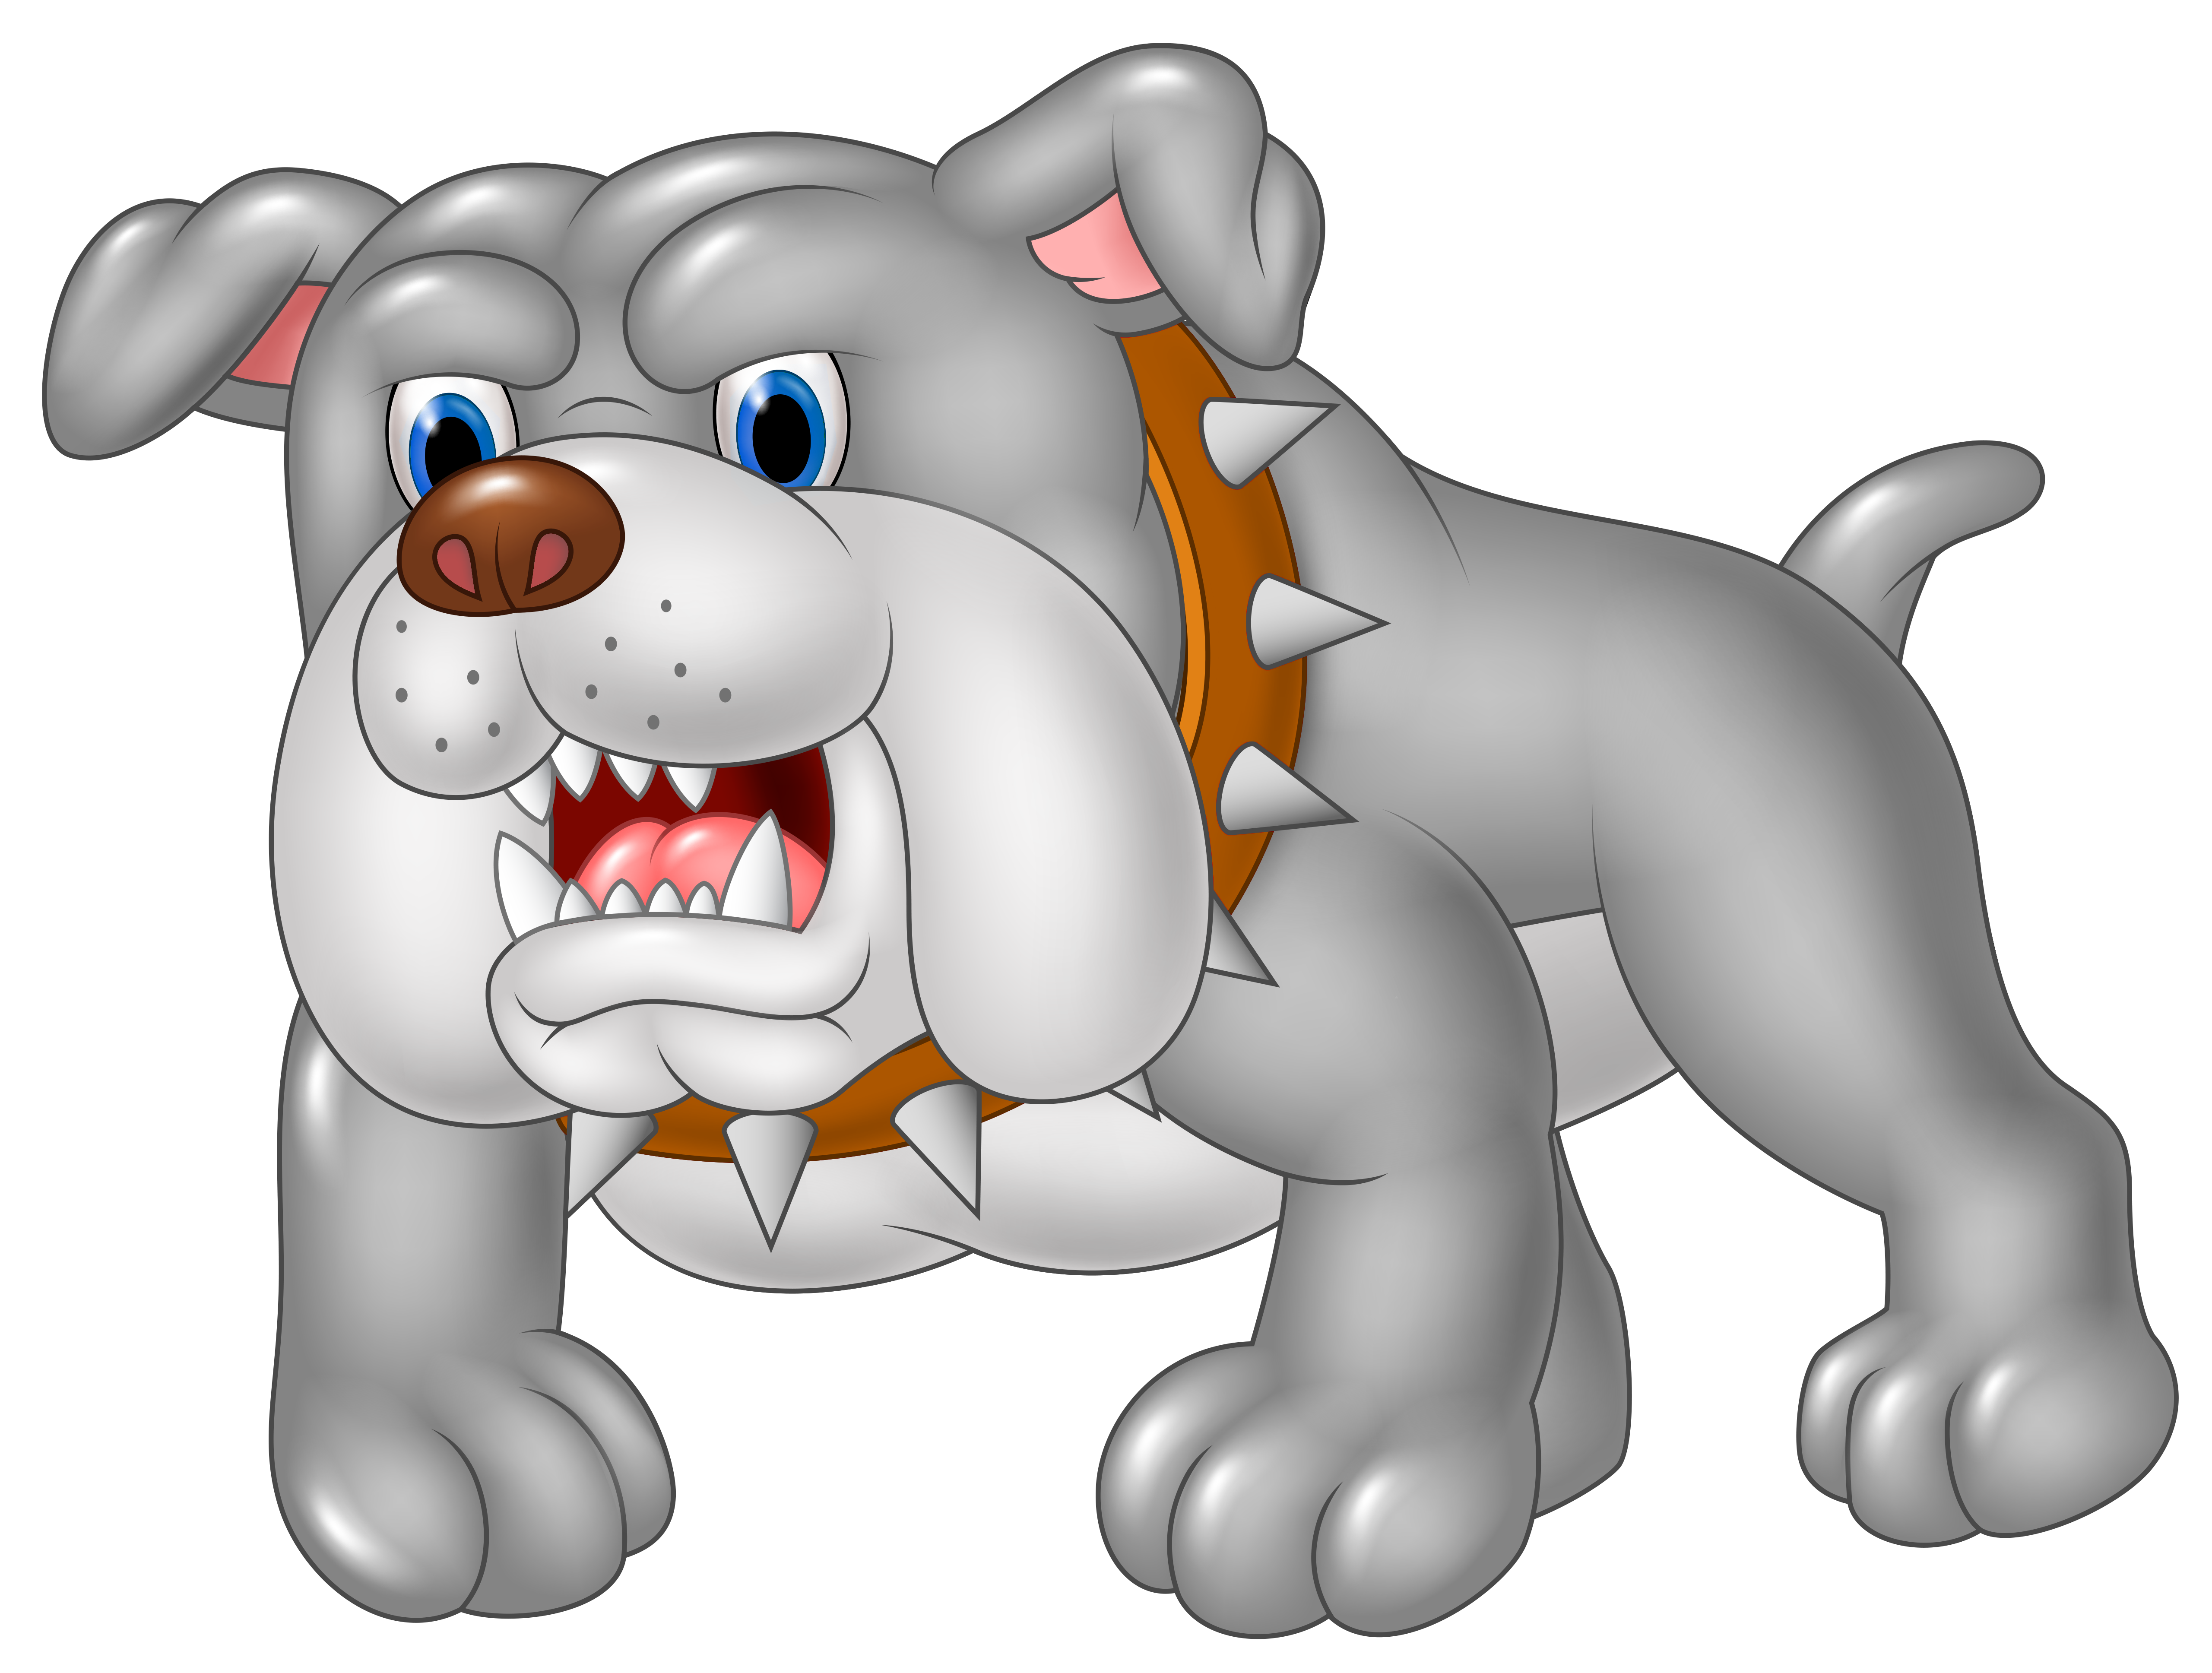 dog clipart png